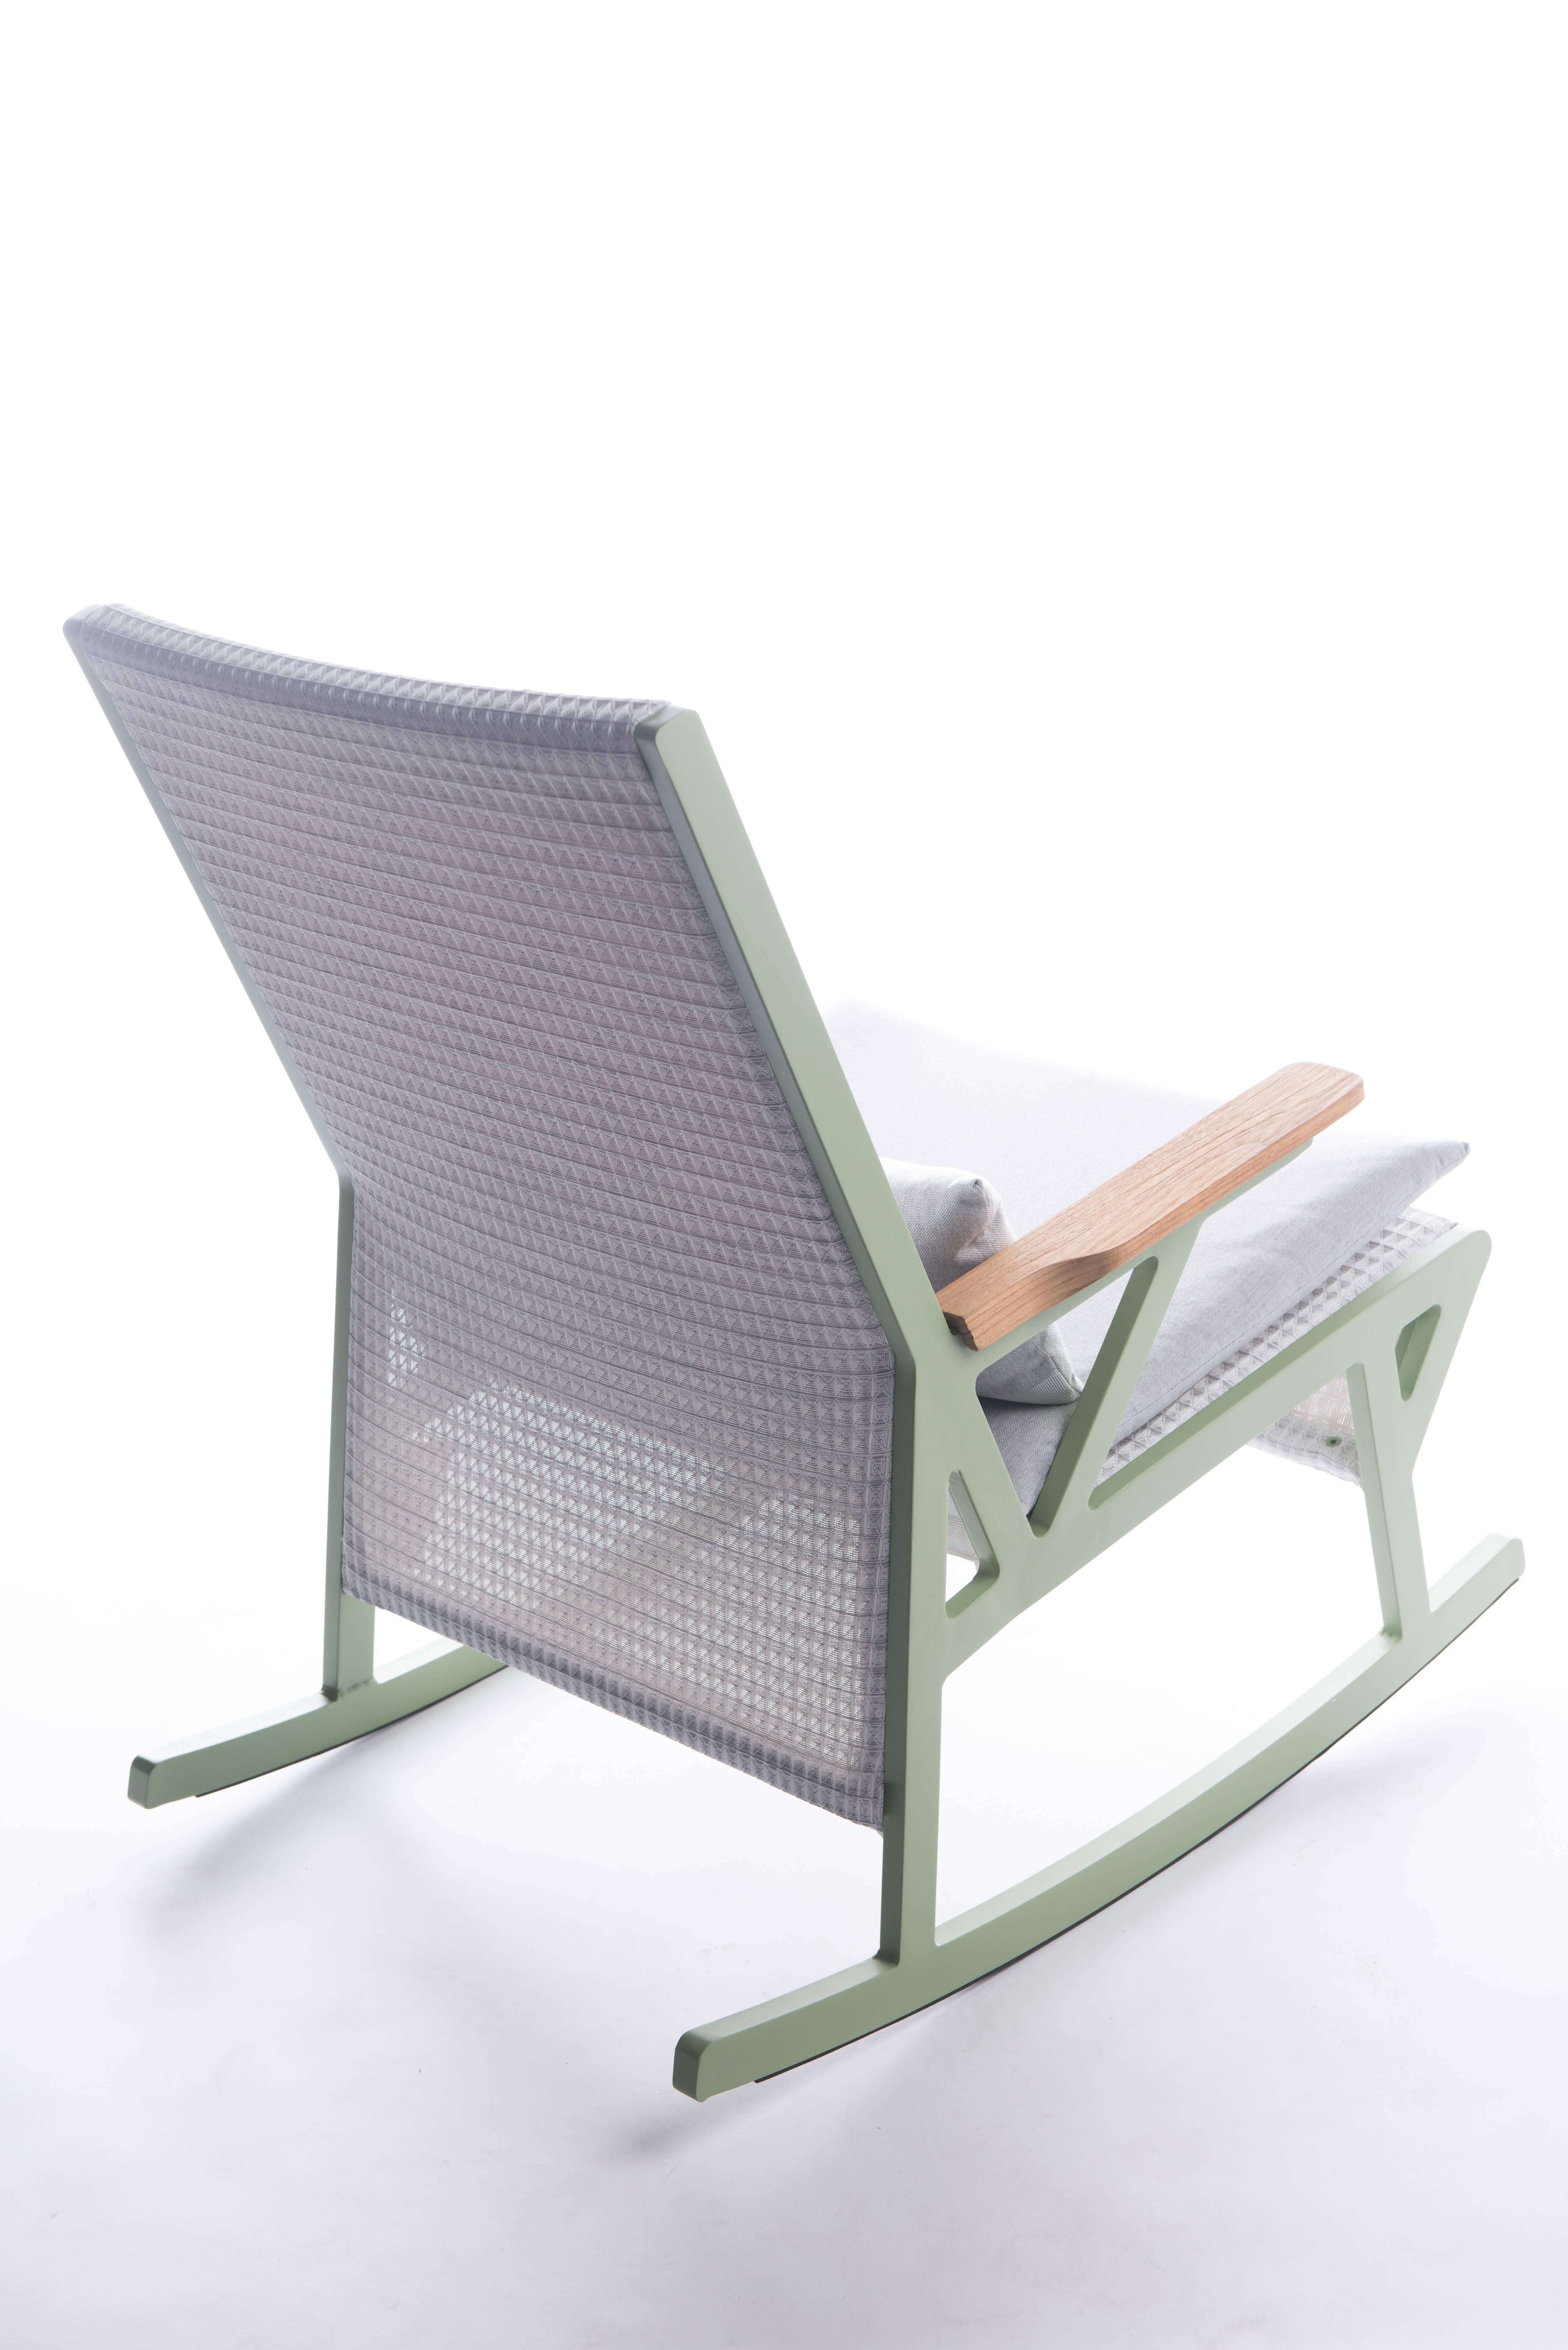 Kettal Vieques is a collection characterized by the combination of an aluminium frame with a new and revolutionary three-dimensional fabric, Nido d